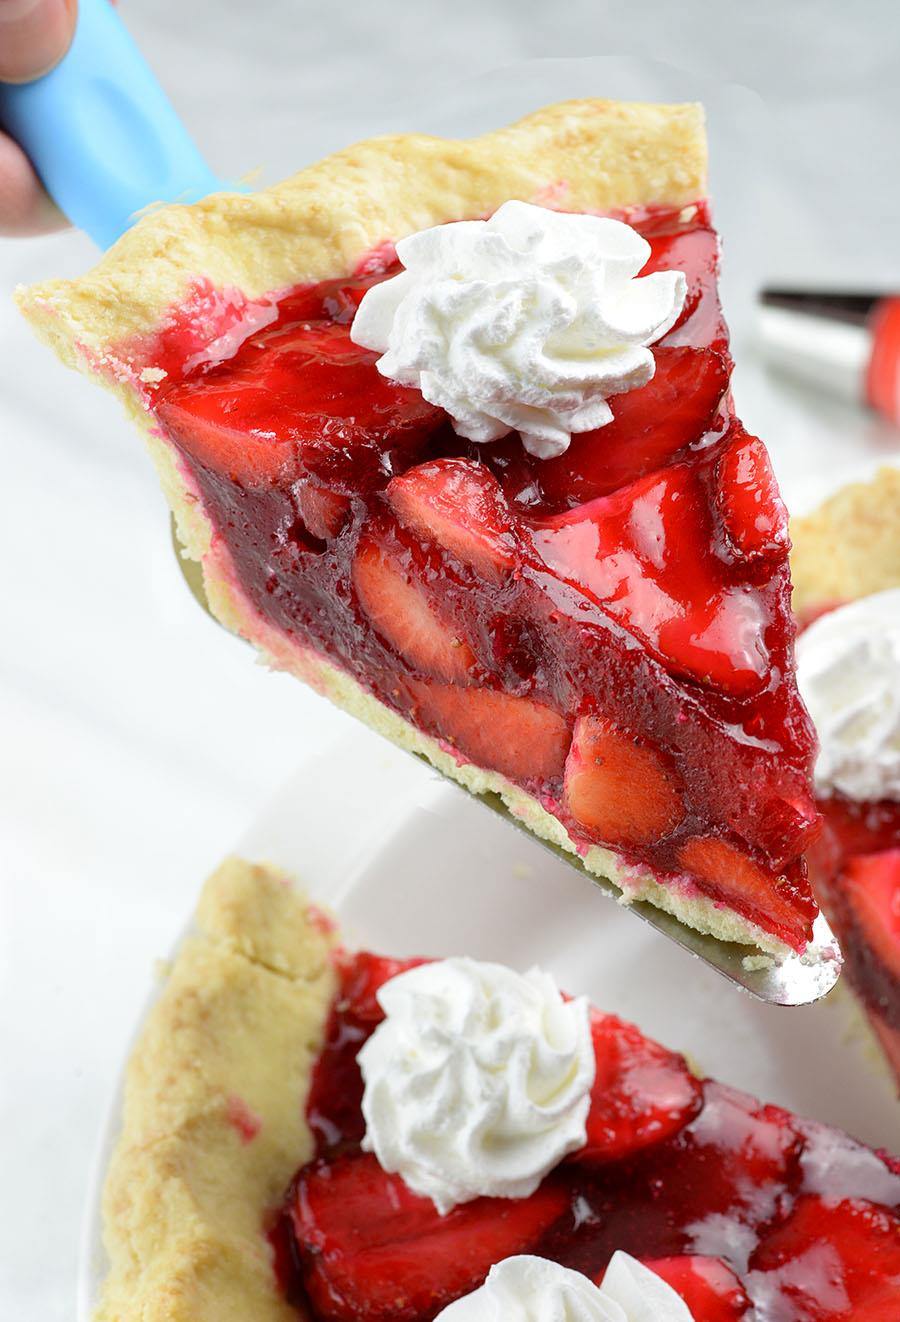 Fresh Strawberry Pie is delicious and easy summer dessert. Buttery pie crust, overloaded with fresh, juicy strawberries and gooey strawberry glaze.